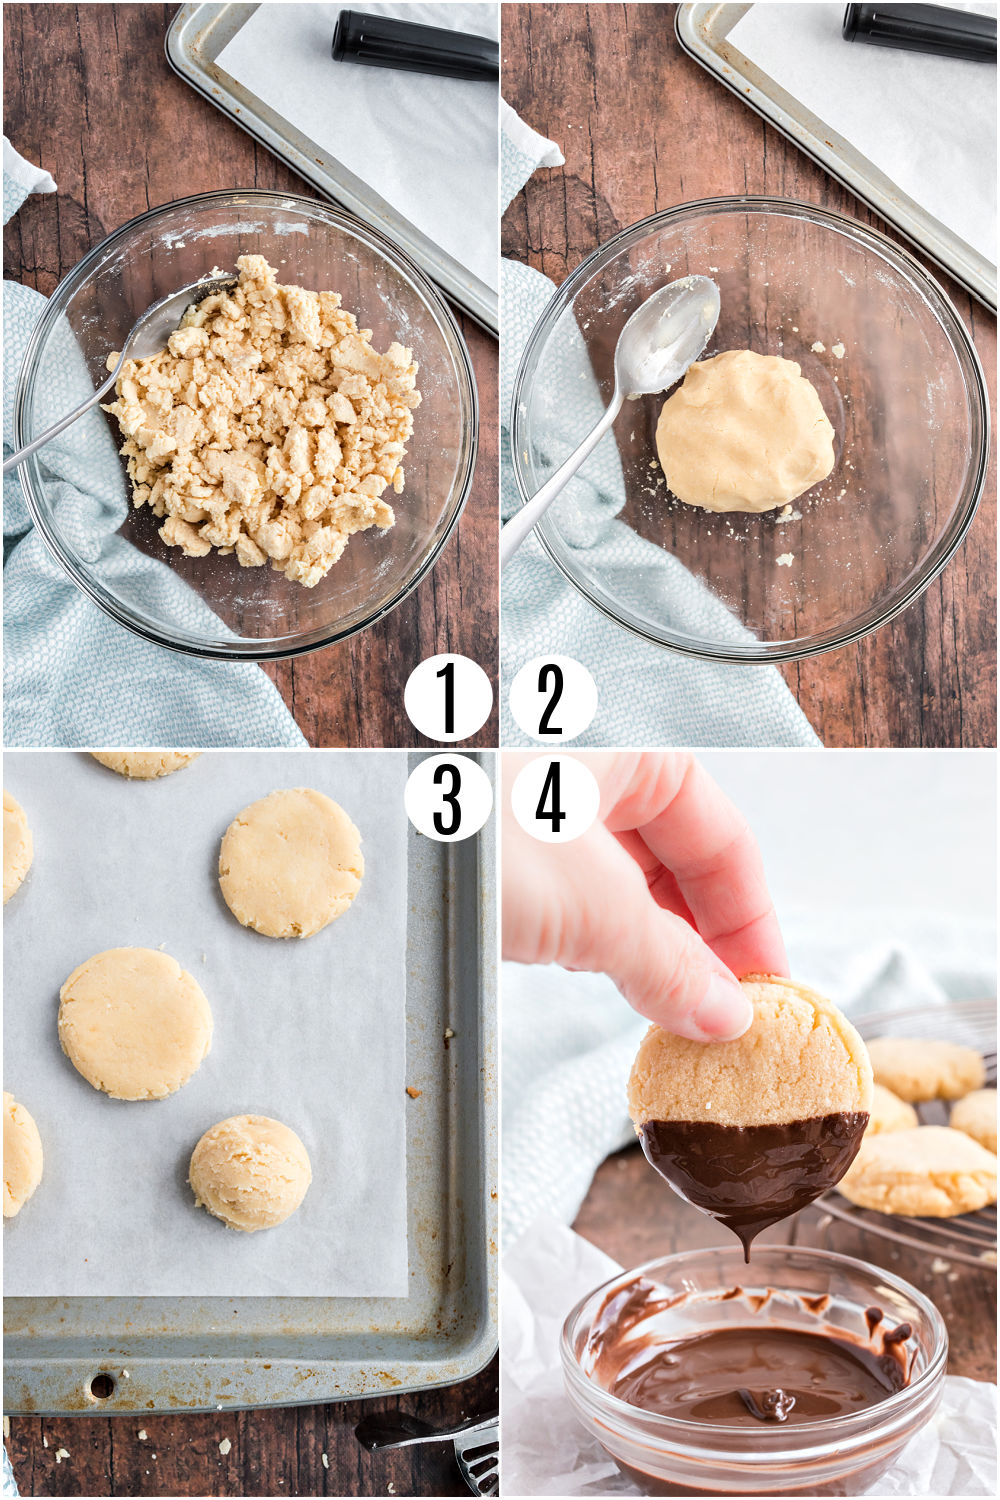 Step by step photos showing how to make sugar free coconut shortbread.